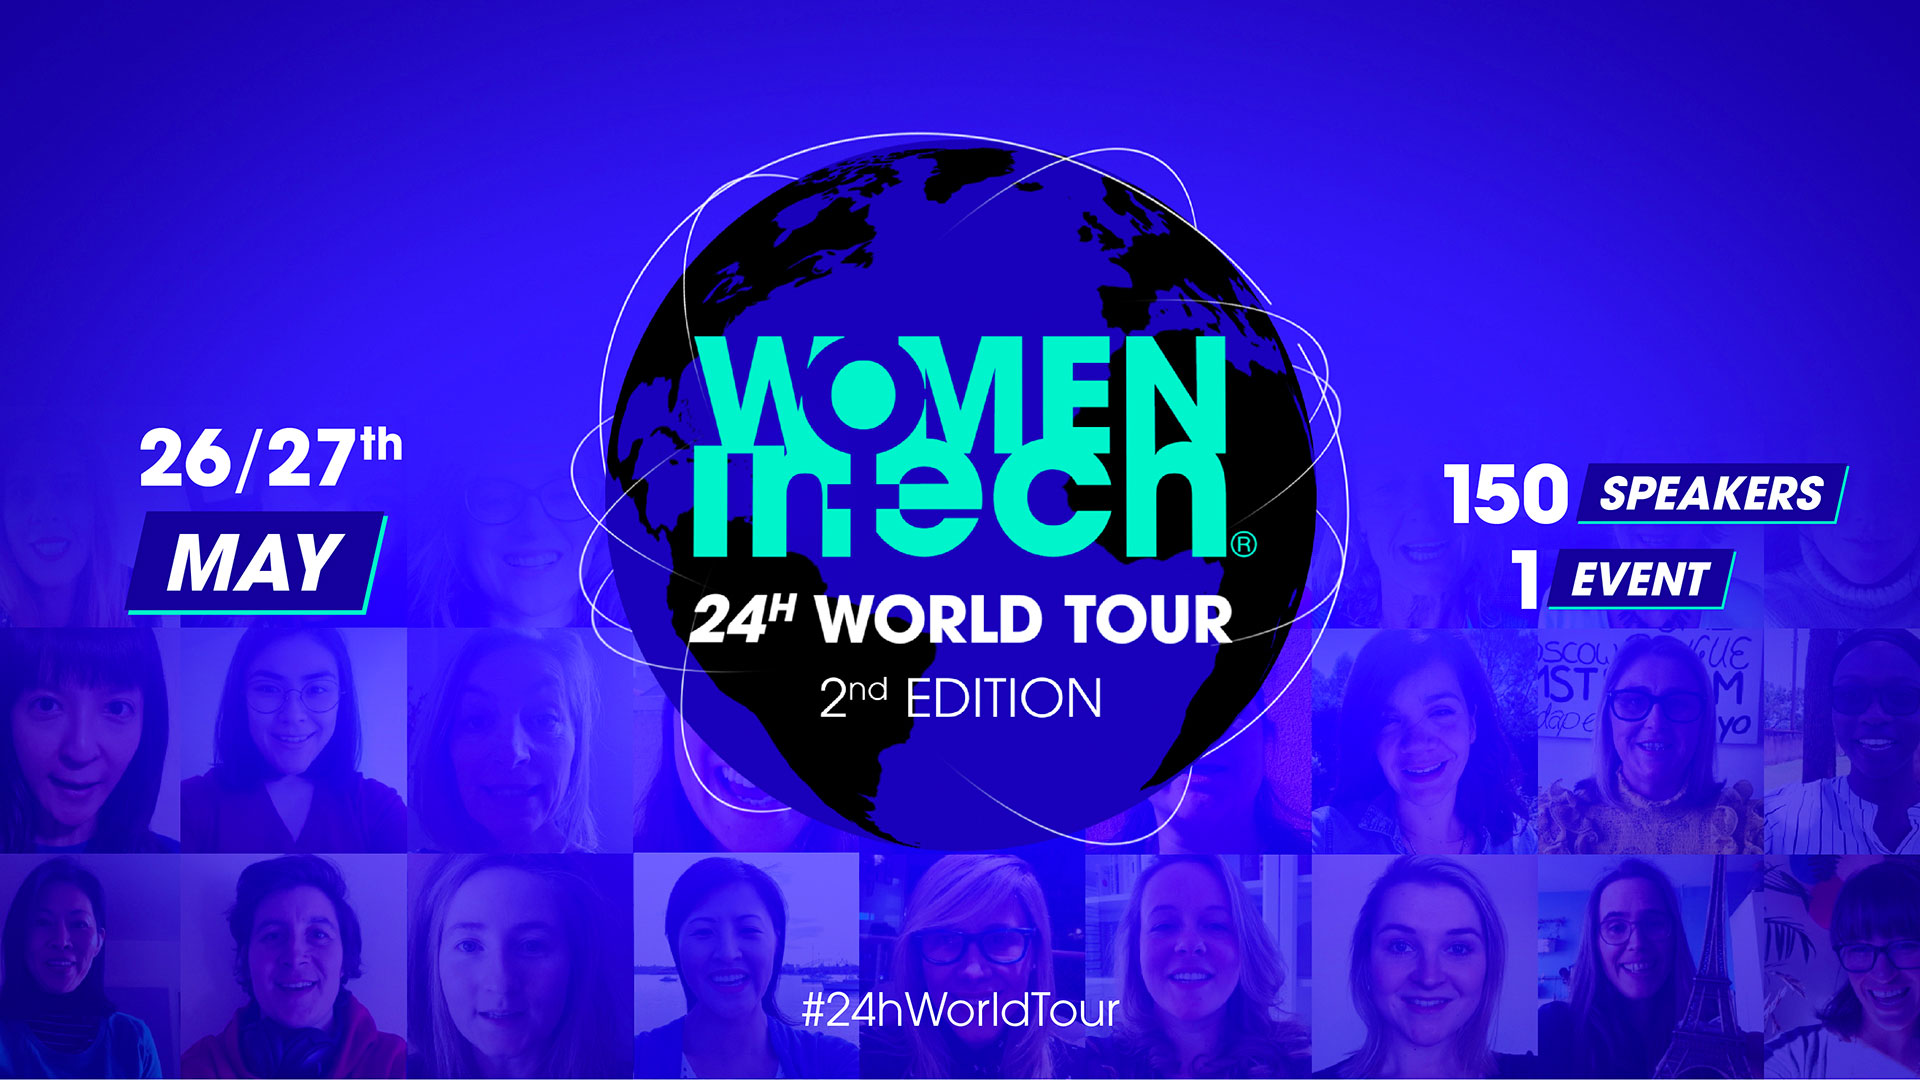 2nd edition of the Women in Tech 24hr World Tour